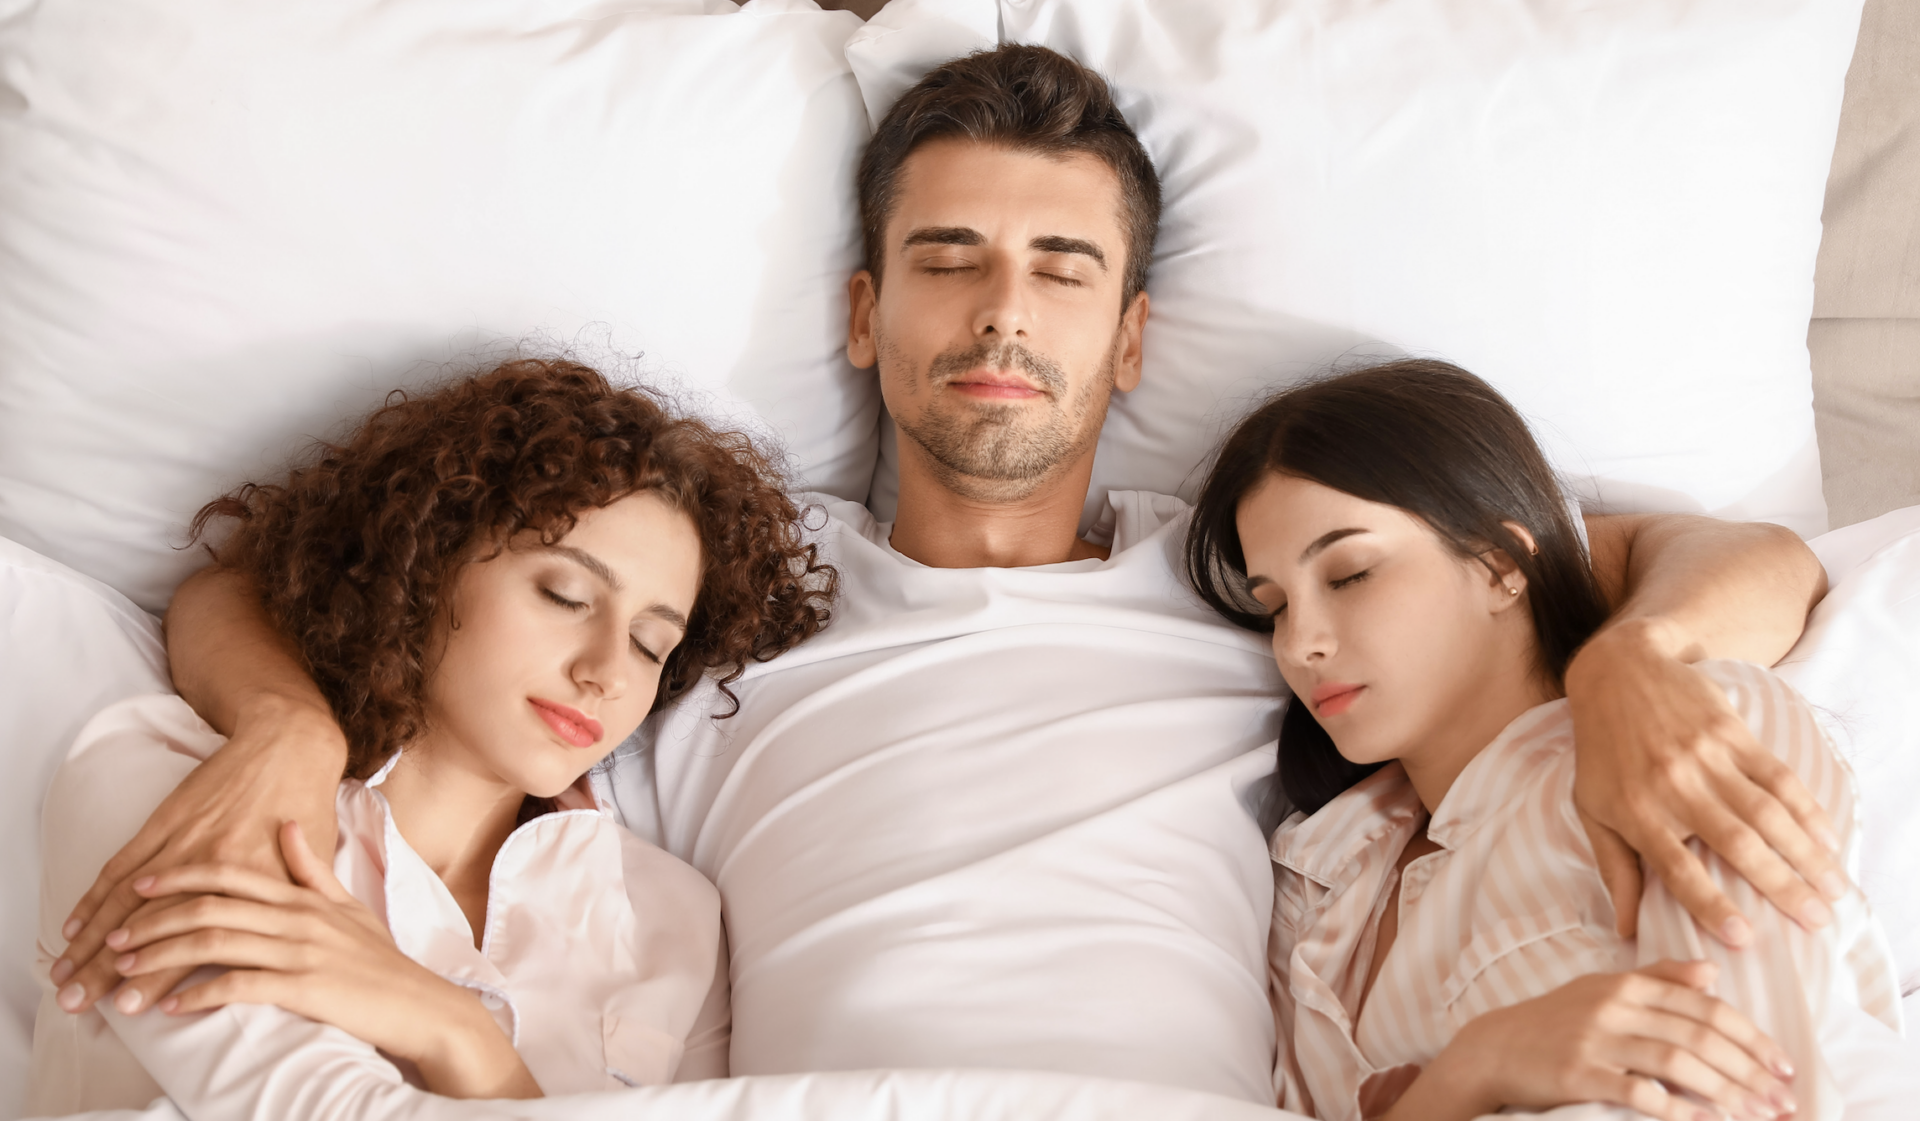 man with two women in bed